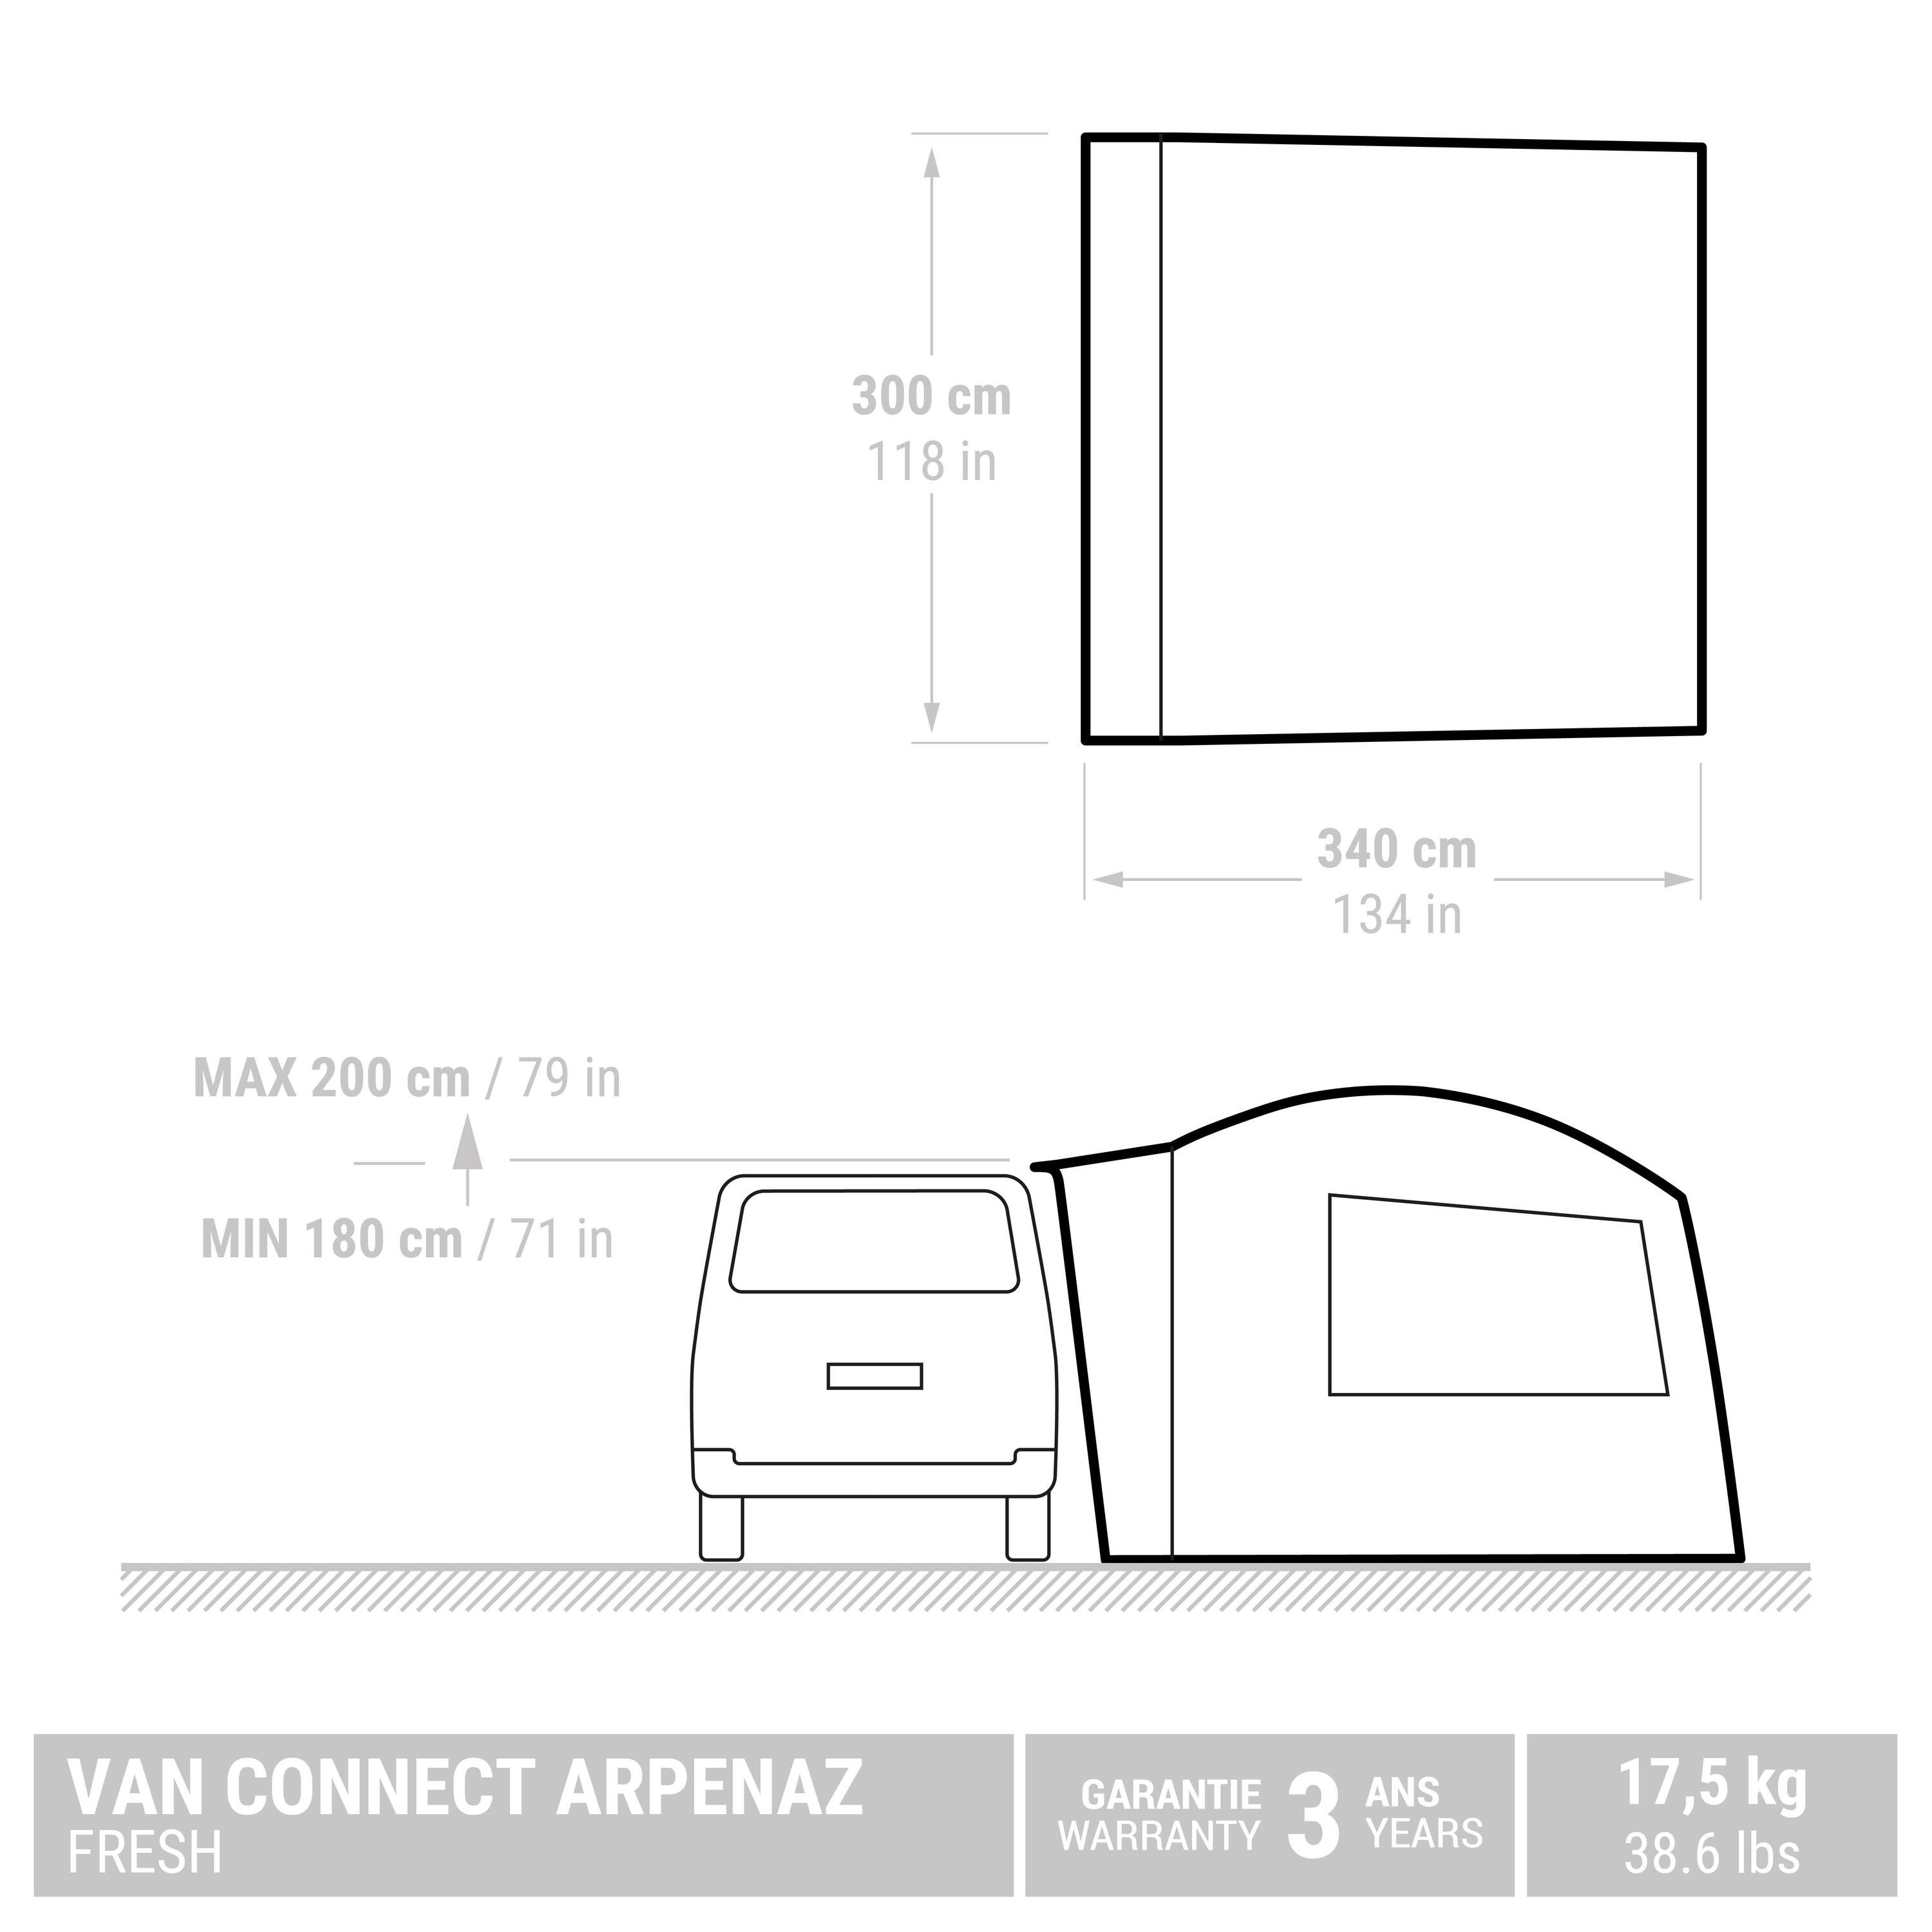 Pole awning for vans and trucks - Van Connect Arpenaz Fresh - 6 people 2/16